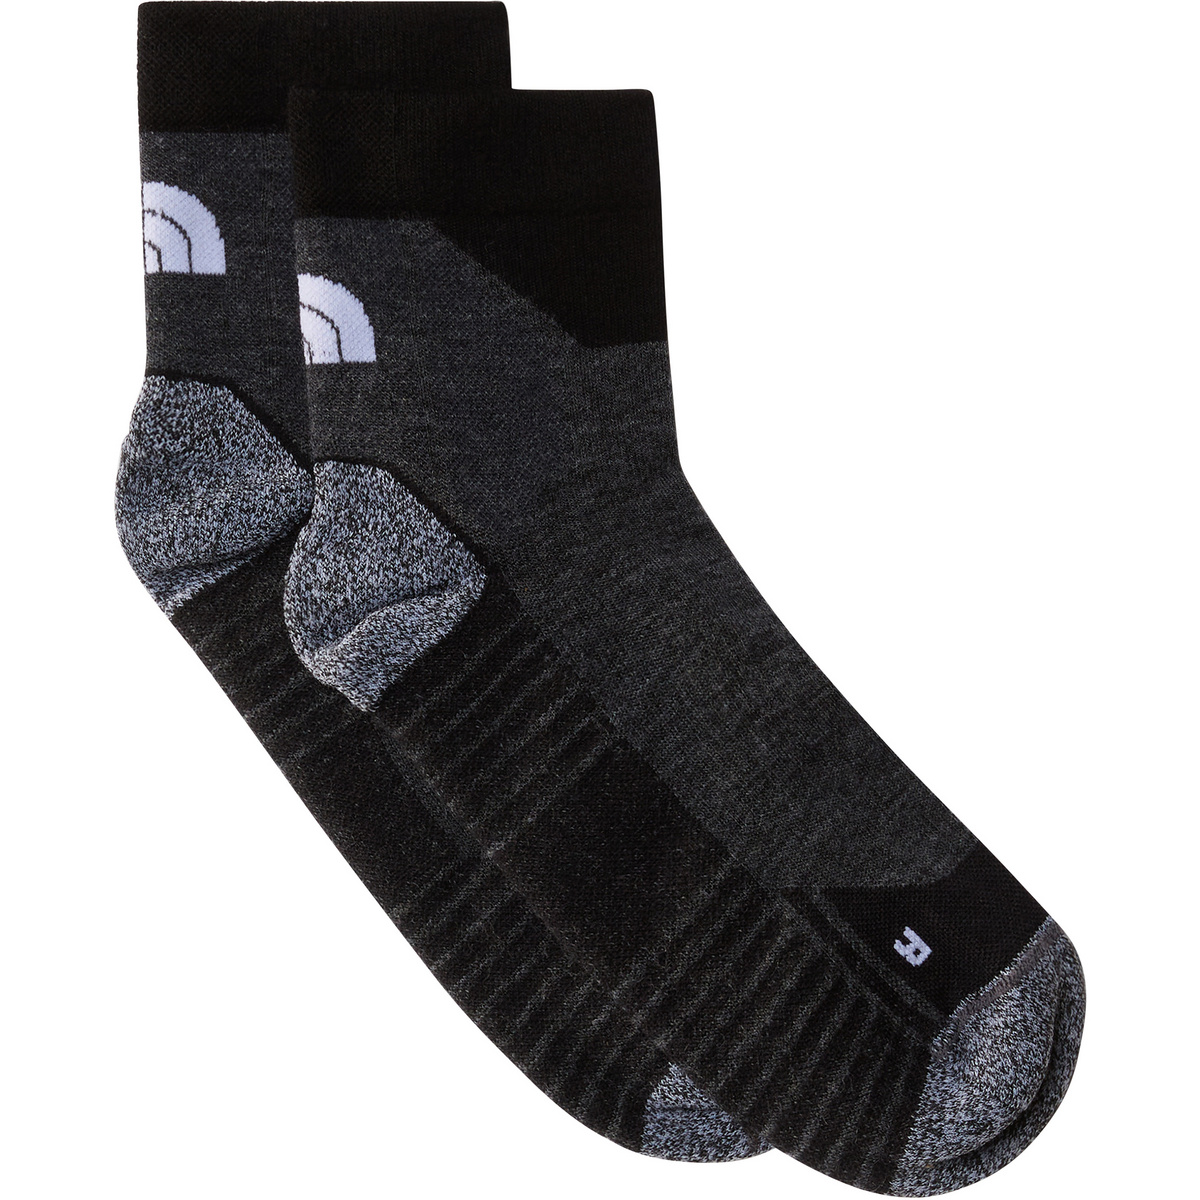 The North Face Hiking Quarter Socken von The North Face